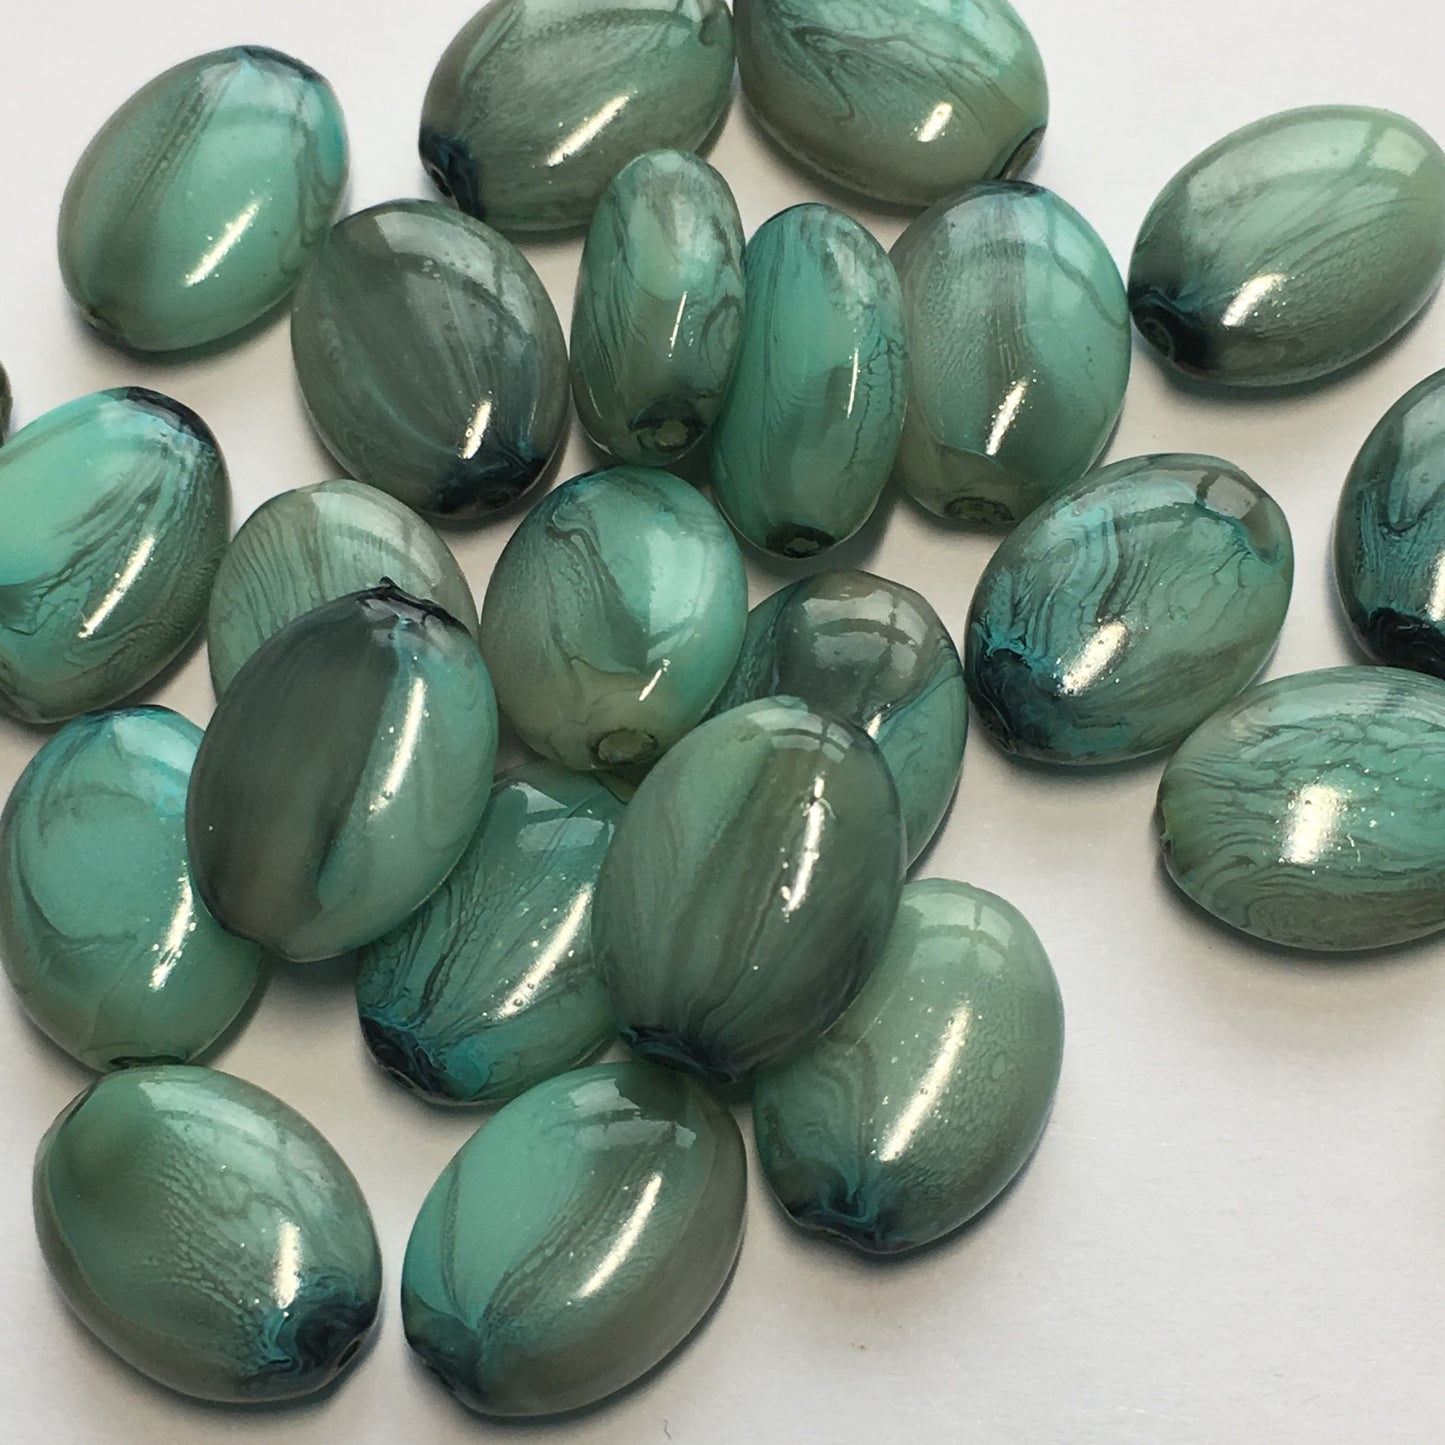 Turquoise with Gray Swirl Glass Flat Oval Beads, 12 x 9 x 4 mm, 26 Beads